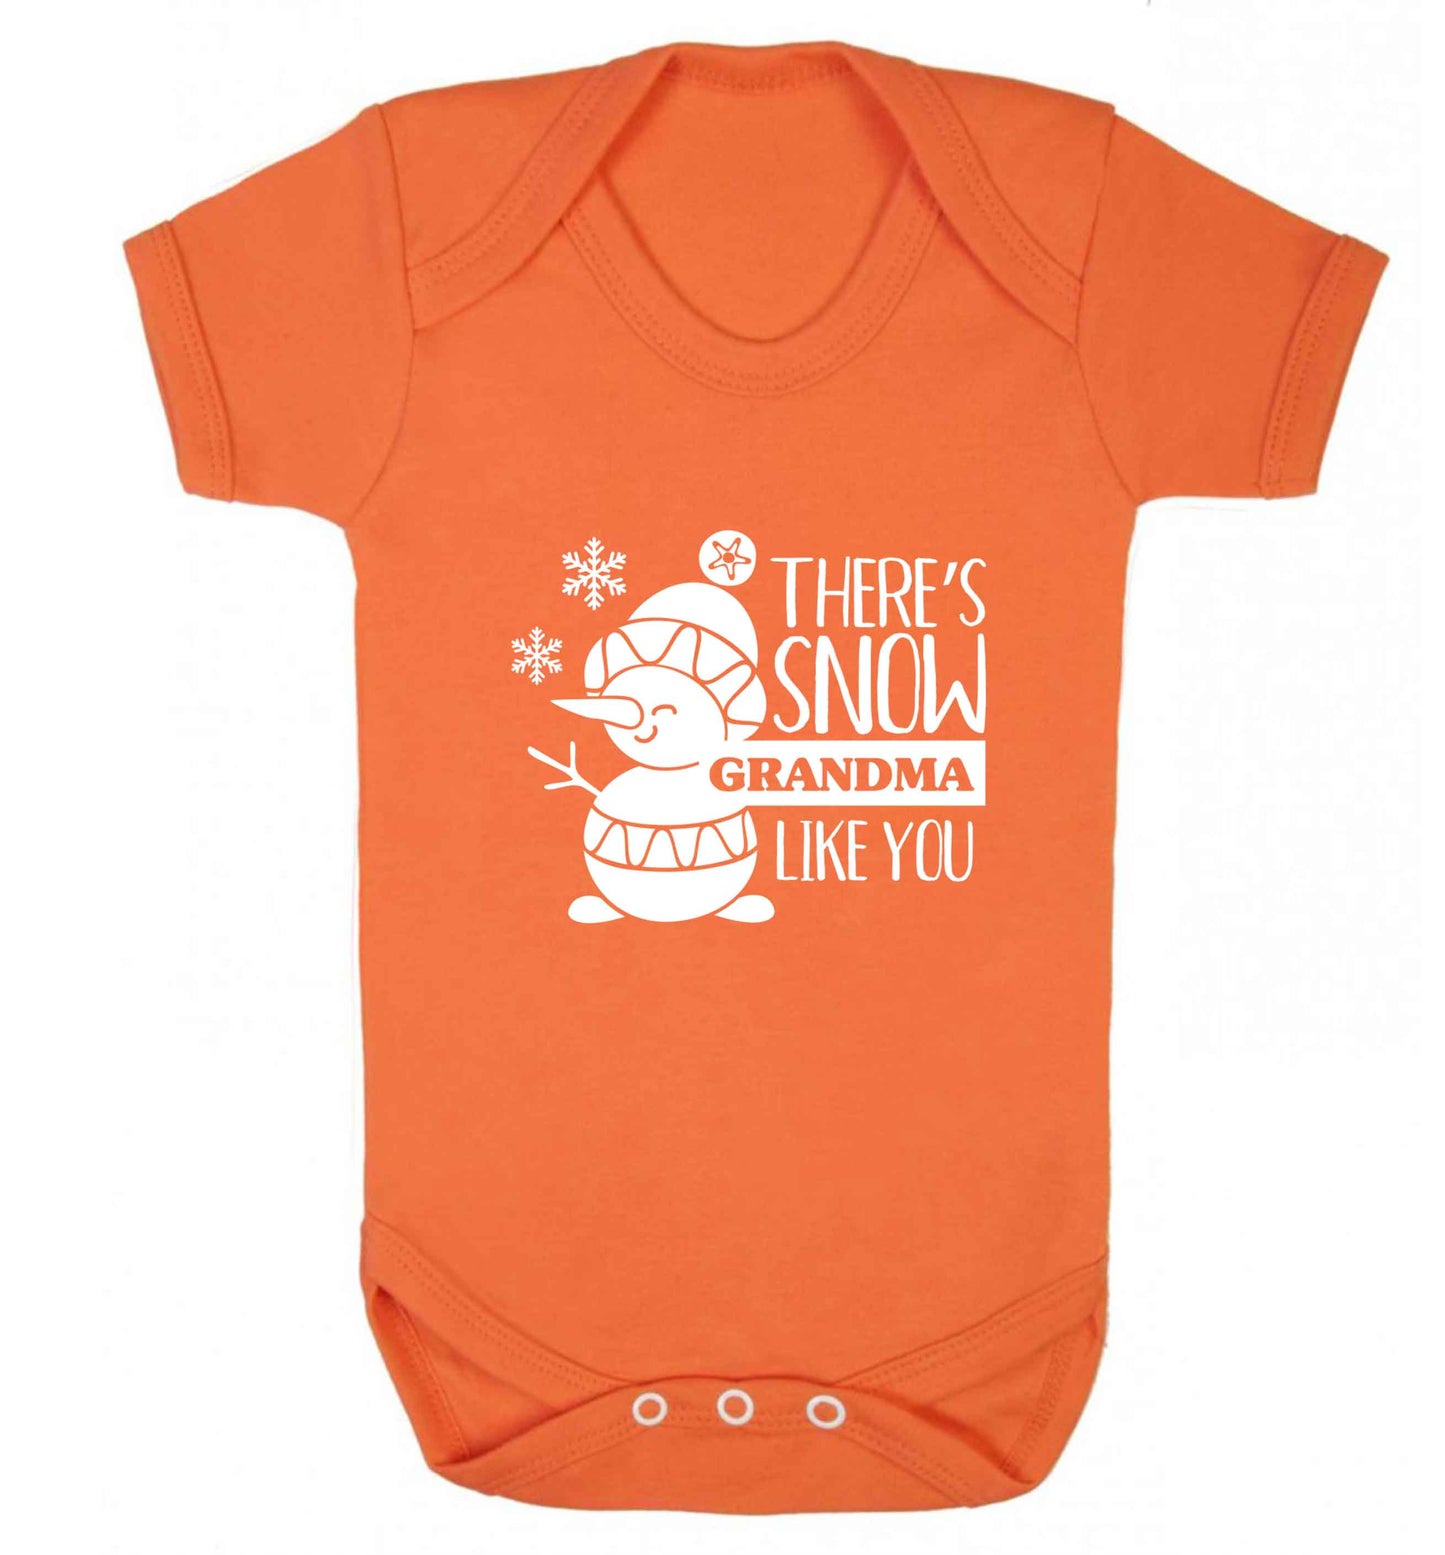 There's snow grandma like you baby vest orange 18-24 months